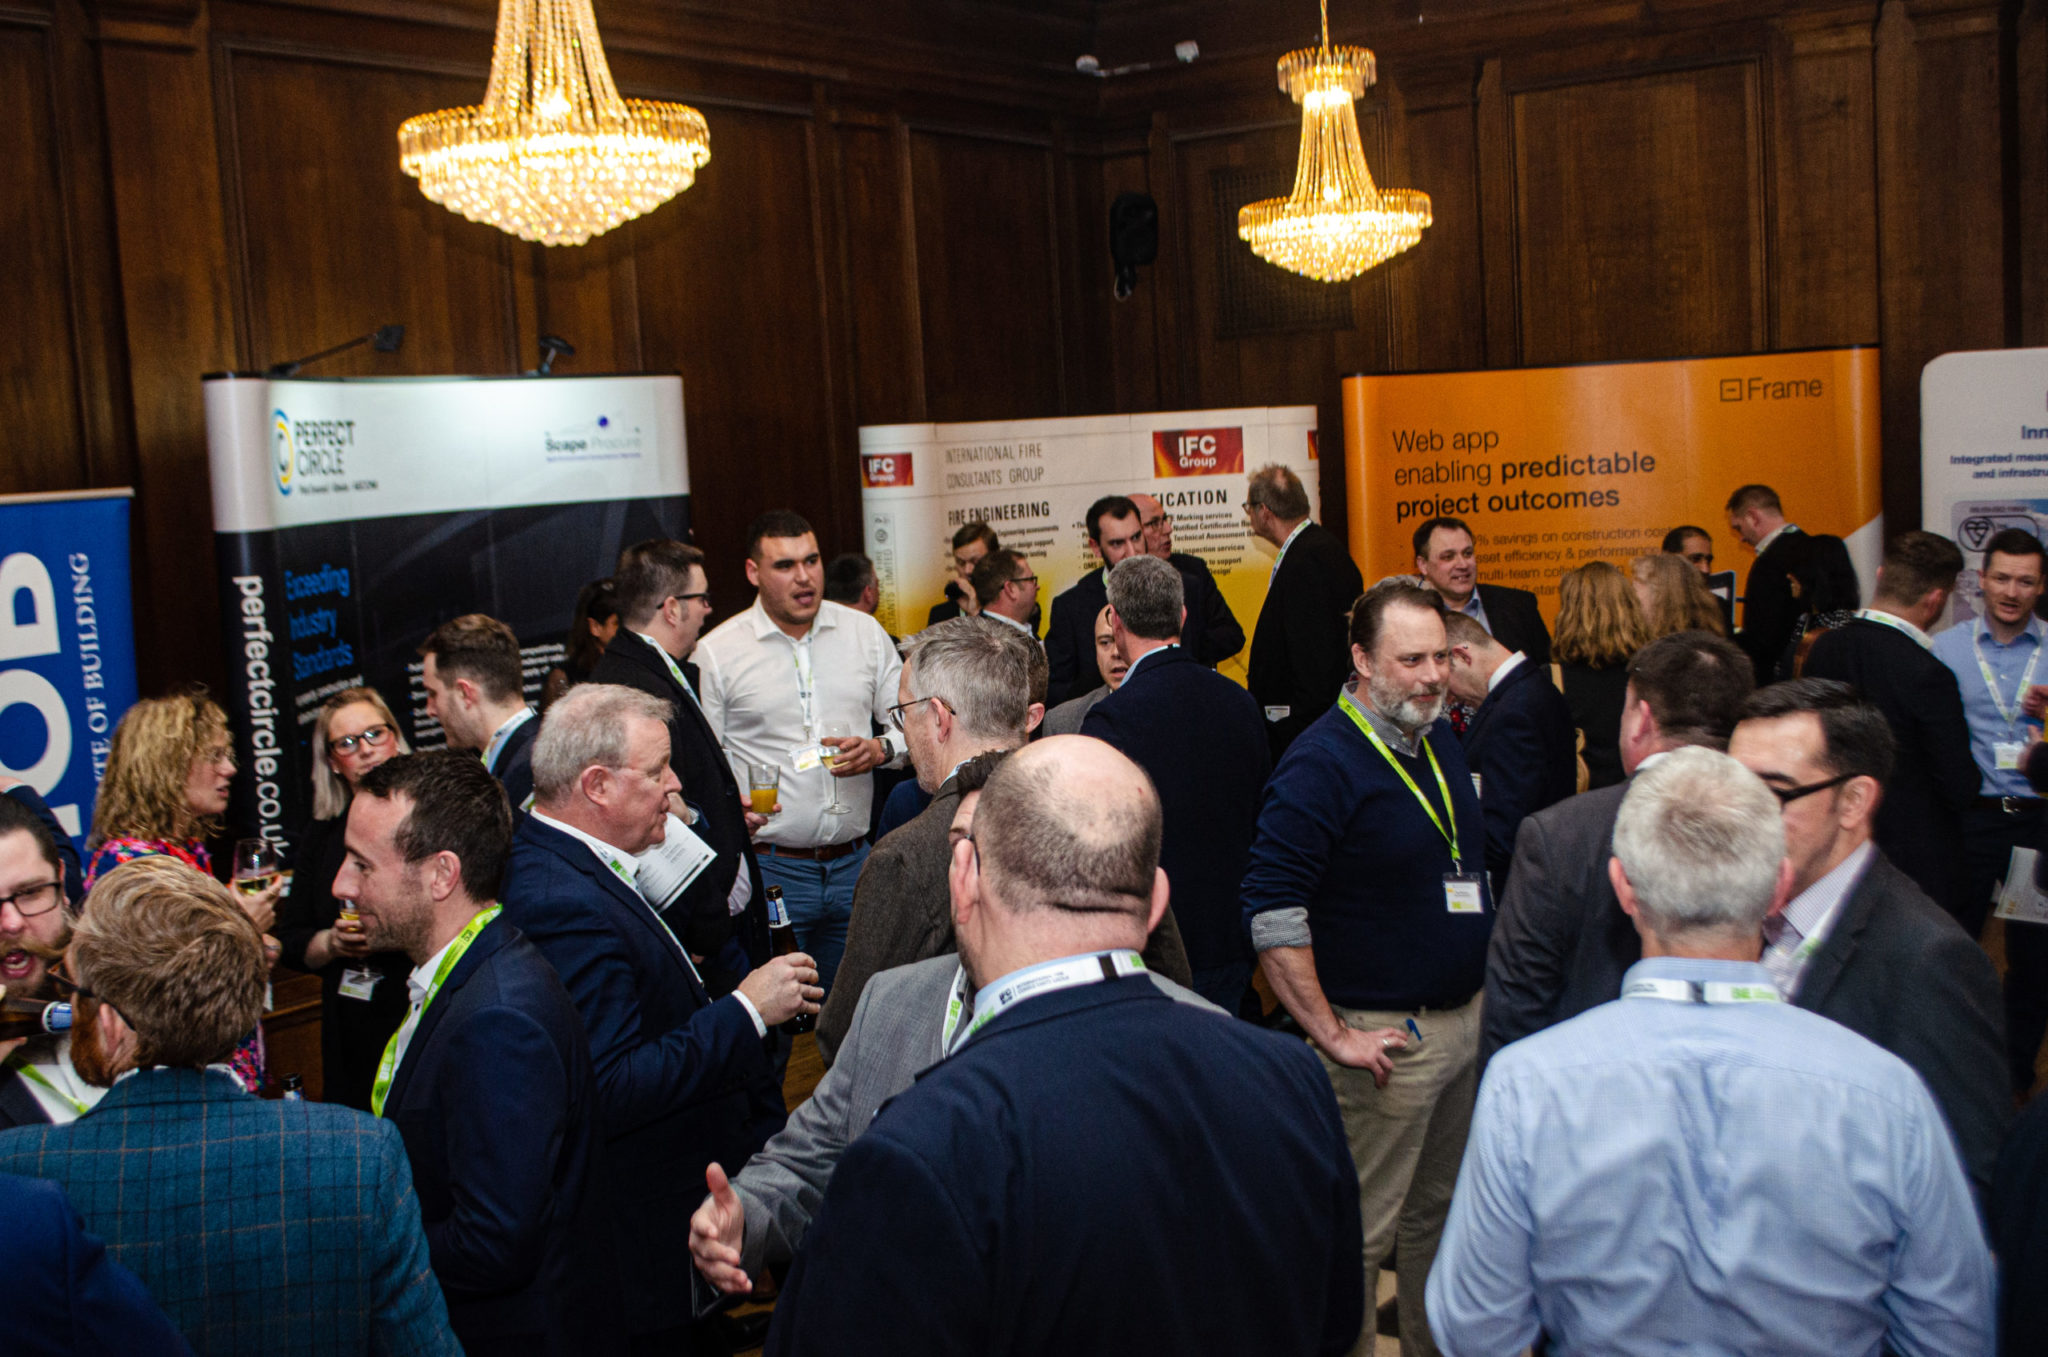 built environment networking events